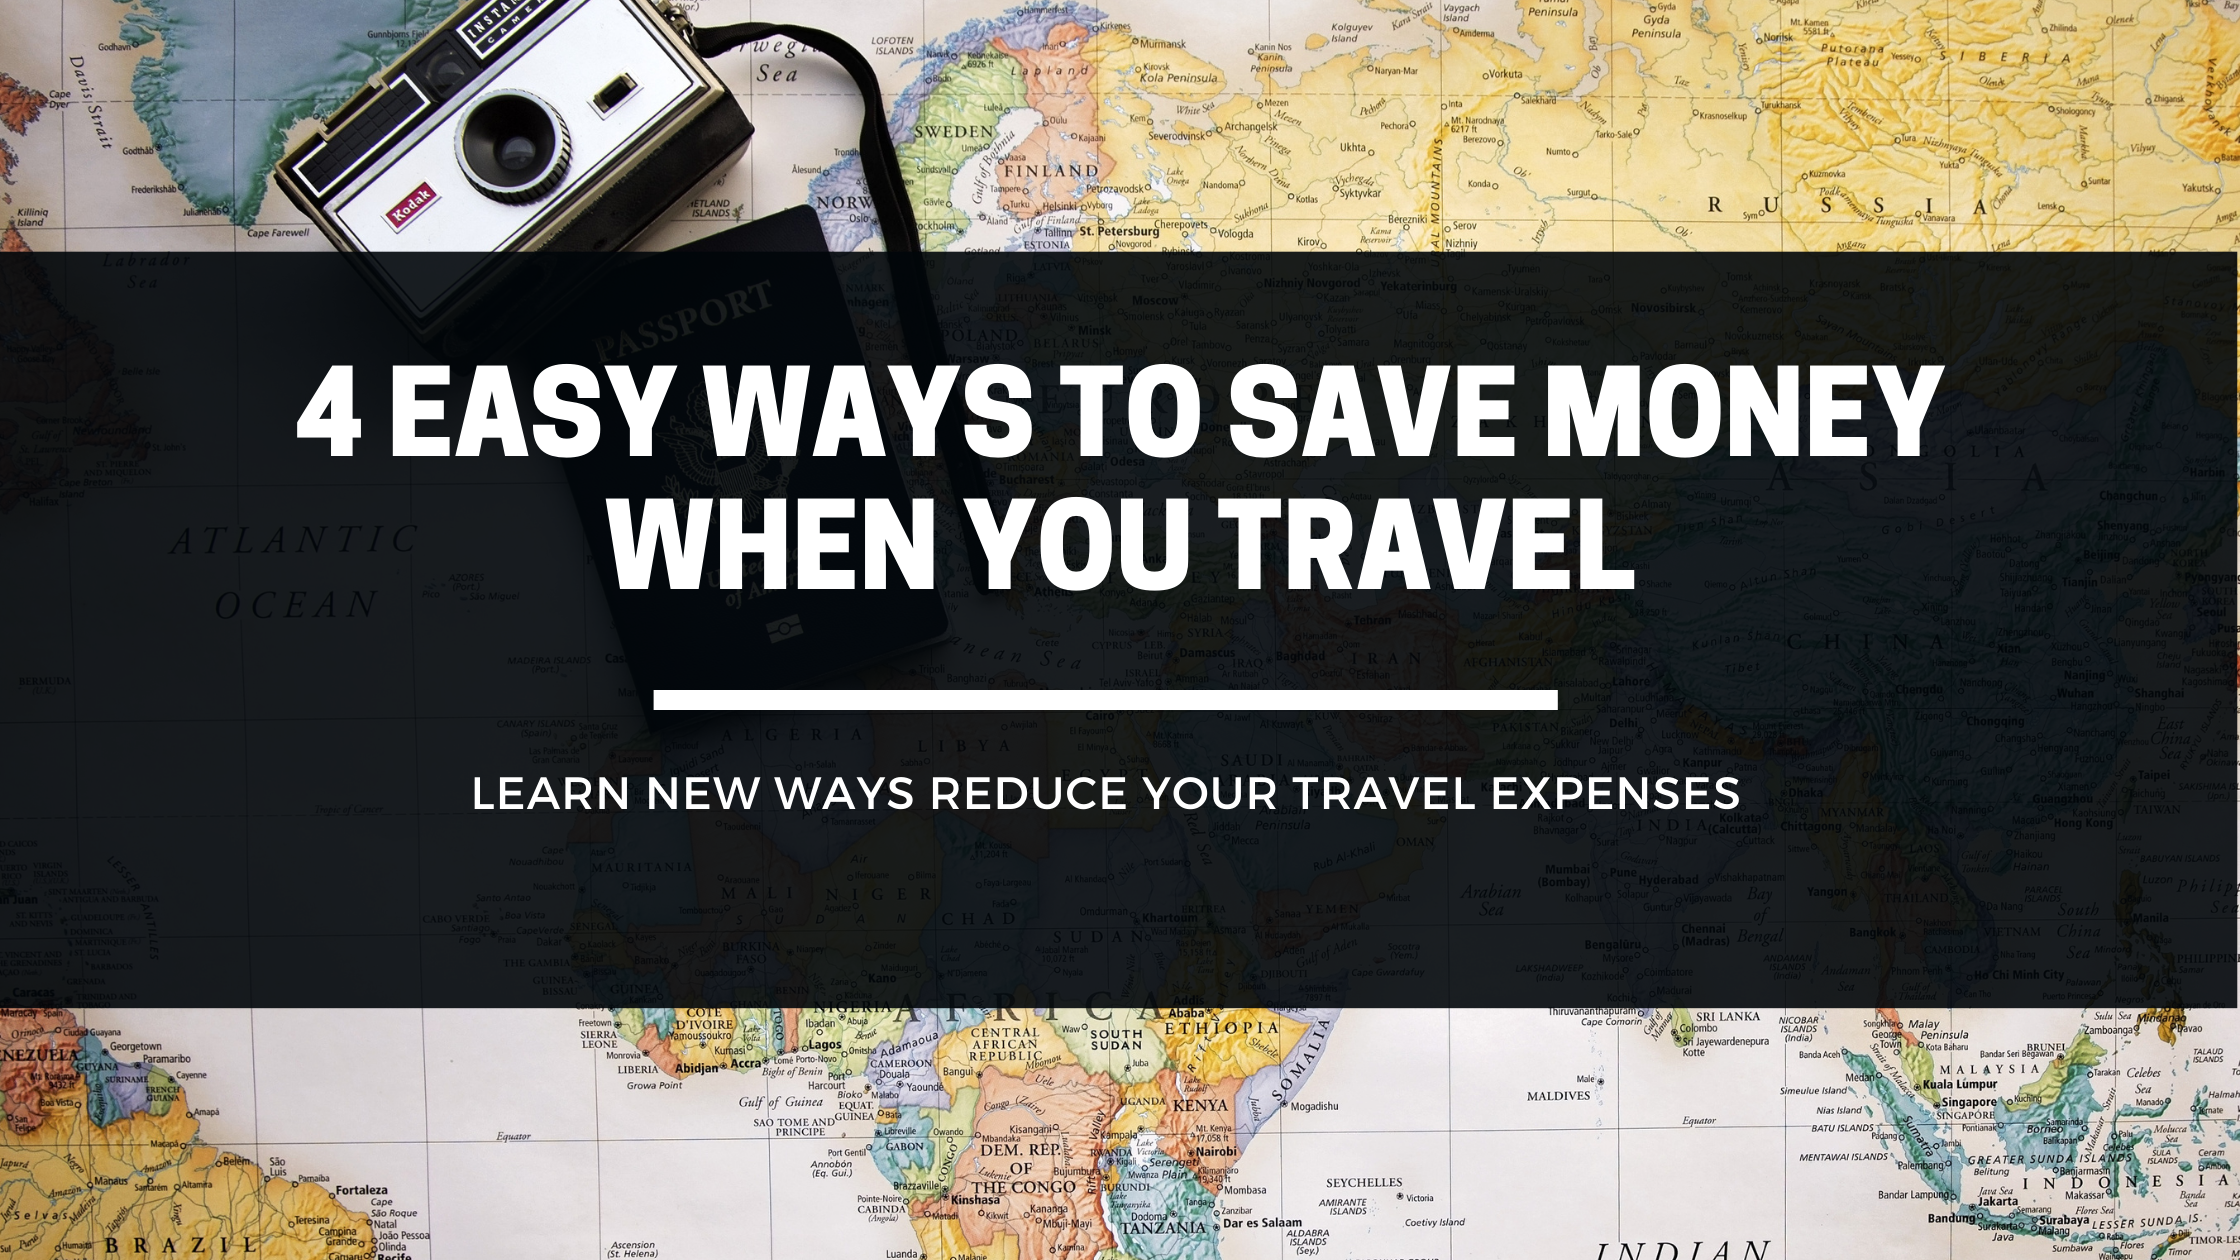 4 Easy Ways To Save Money When You Travel